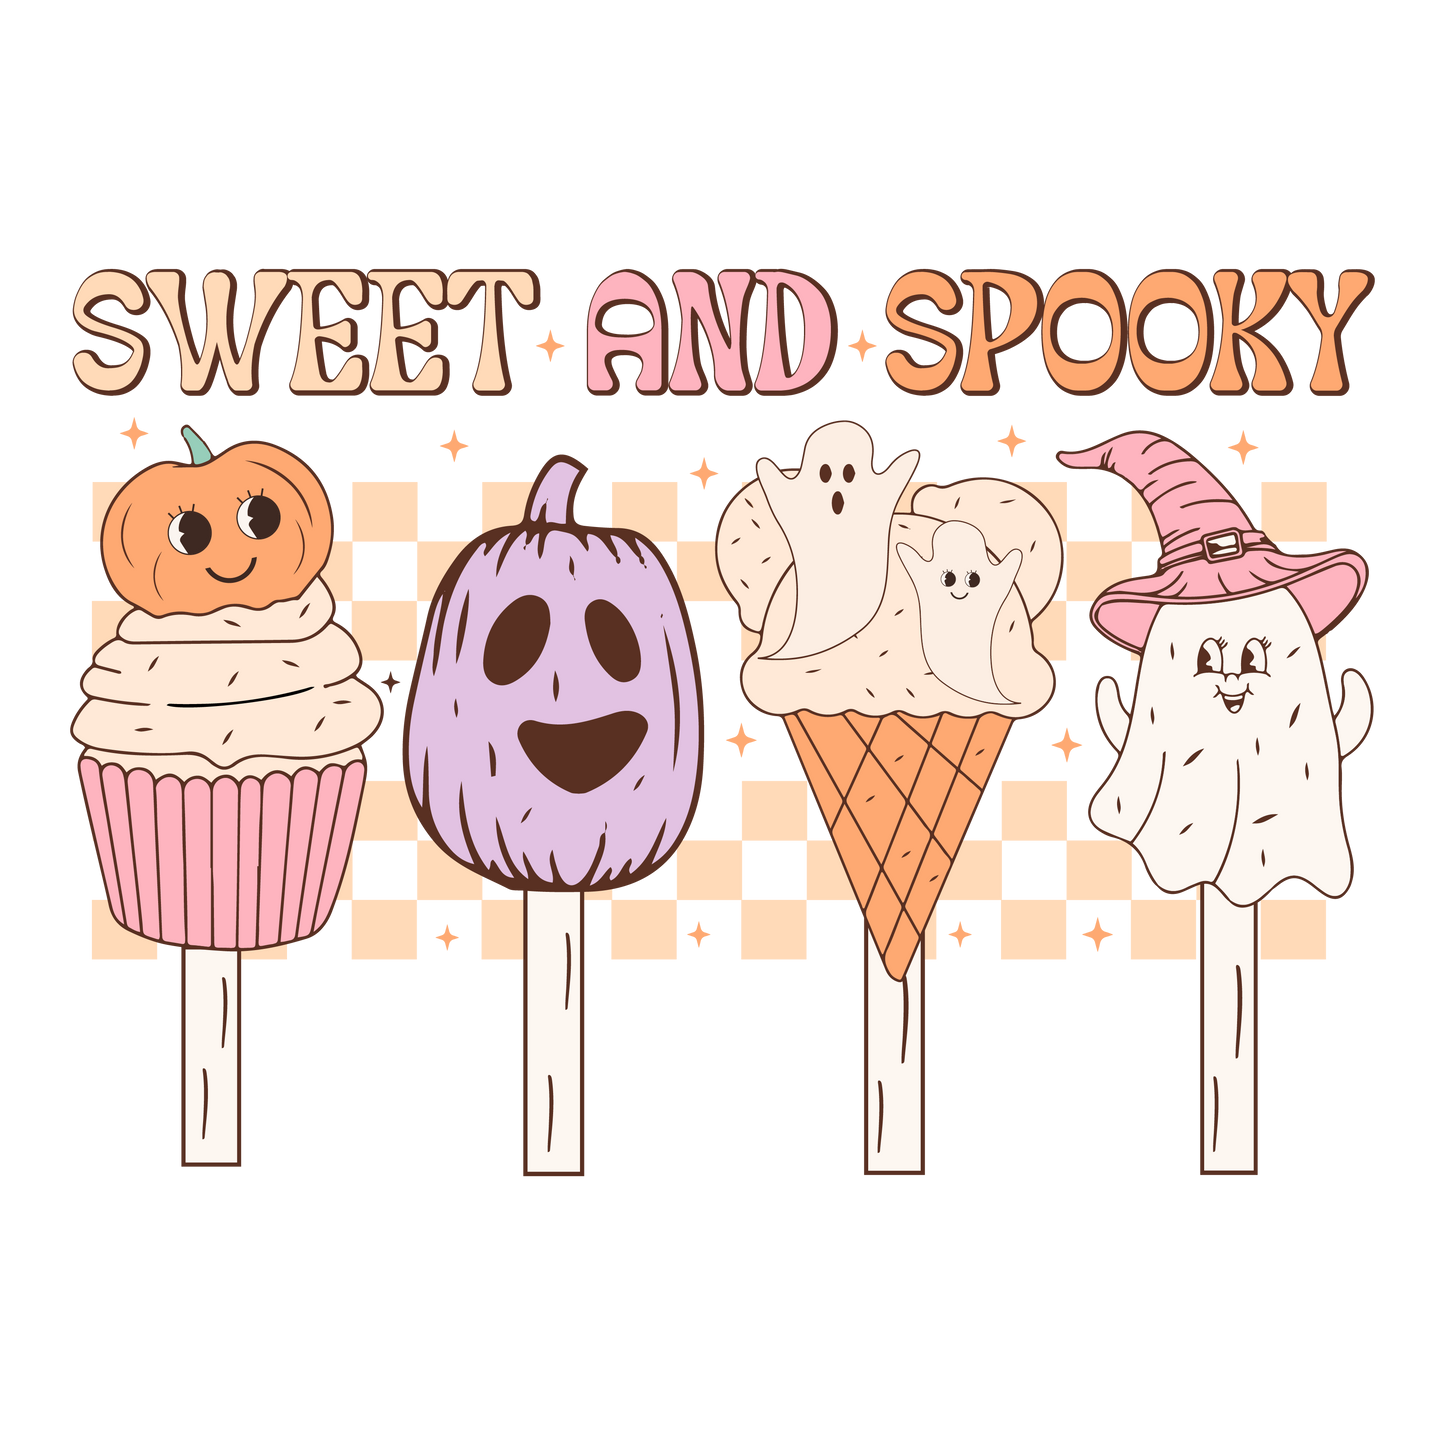 SWEET AND SPOOKY